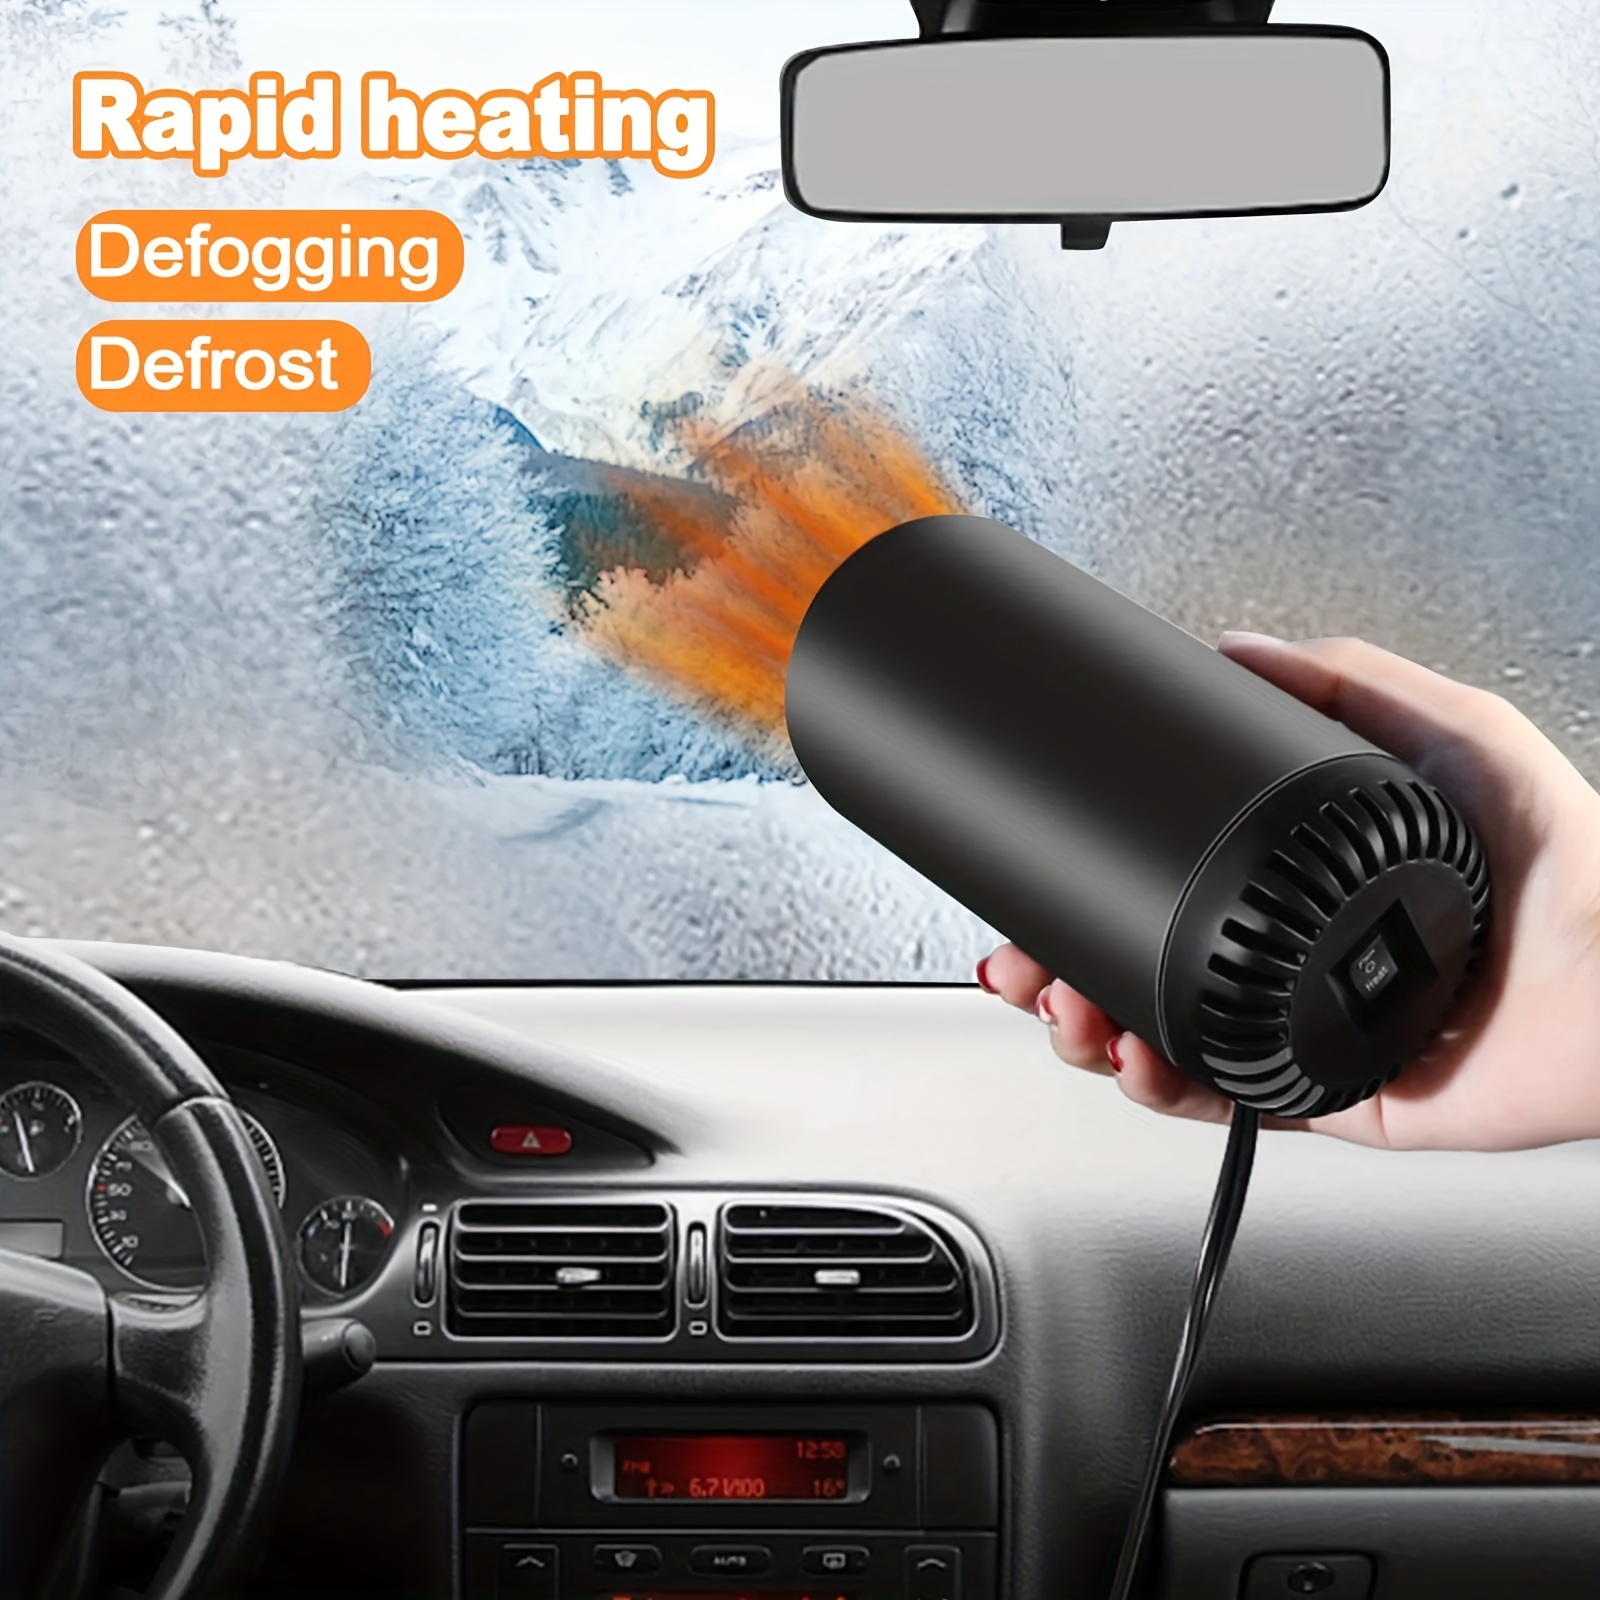 TqaSer 【 2023 New Version】Portable Car Heater,Auto Heater Fan, Car Windshield Defogger Defroster, 2 in1 Fast Heating or Cooling Fan, 12V 150W Auto